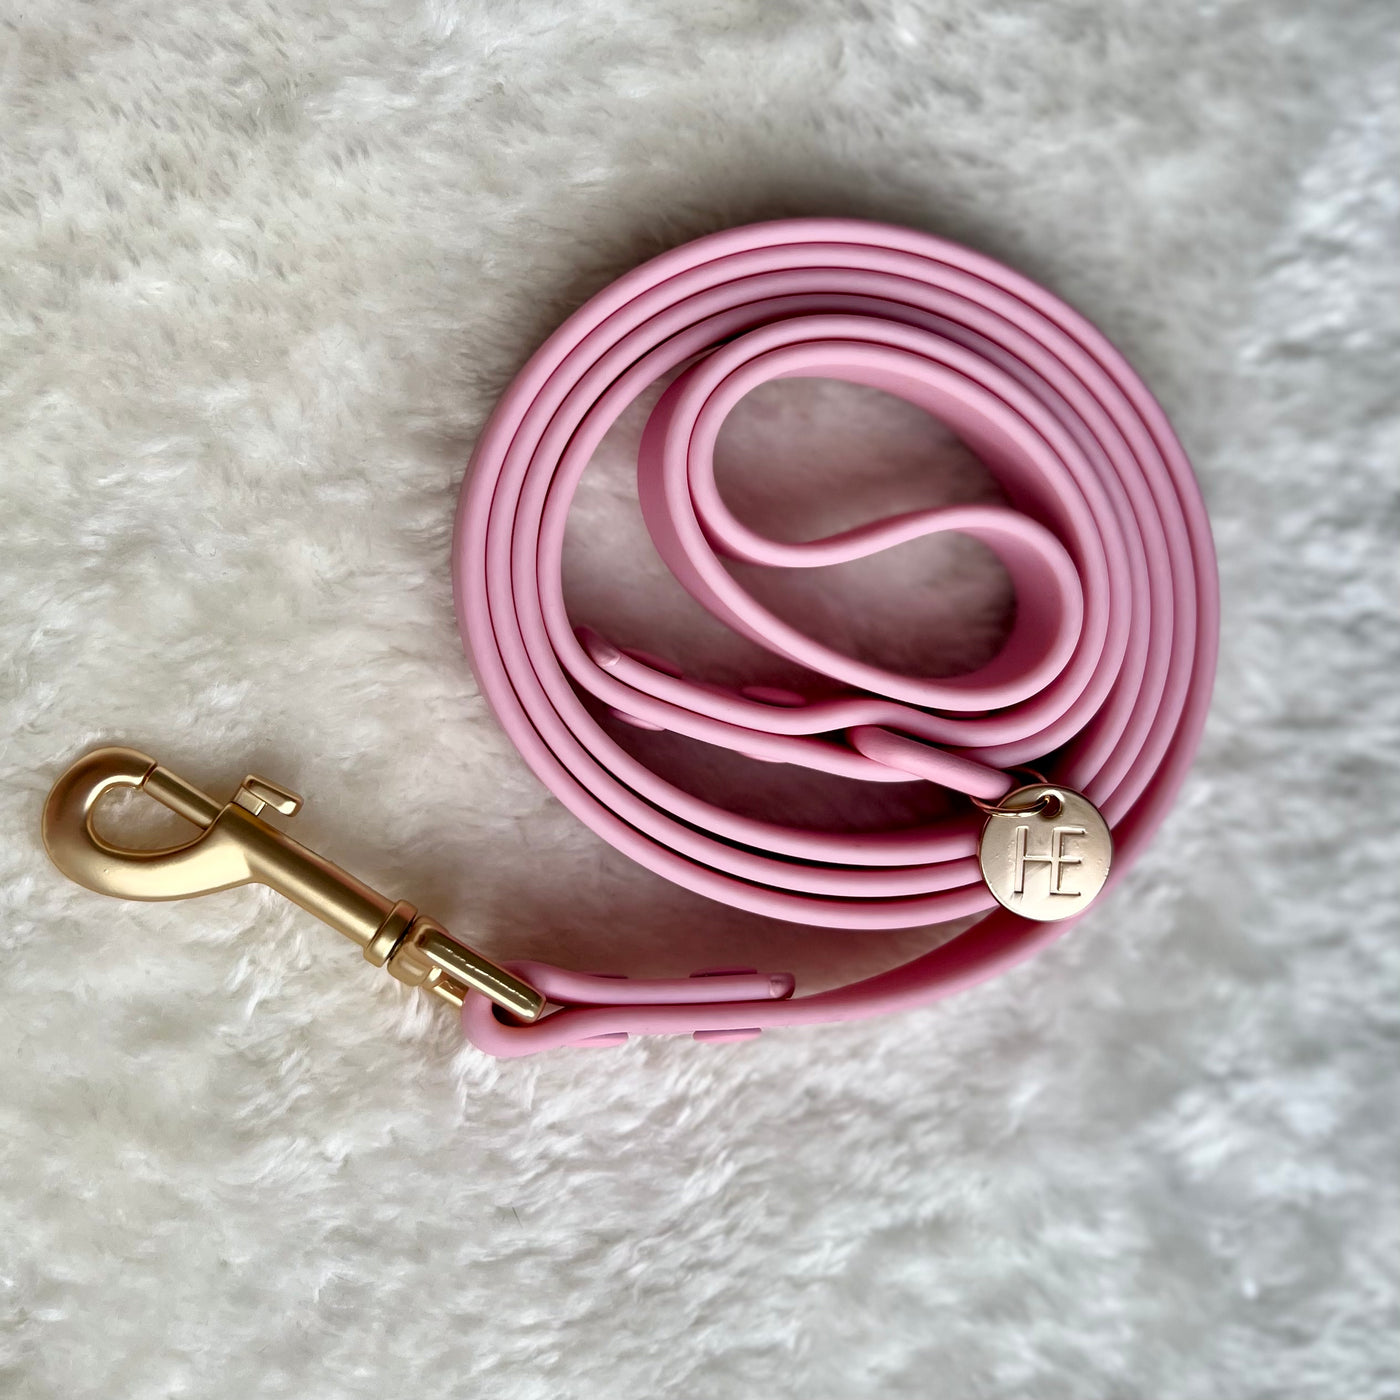 Candy floss Pink 'All Weather' Dog Collar